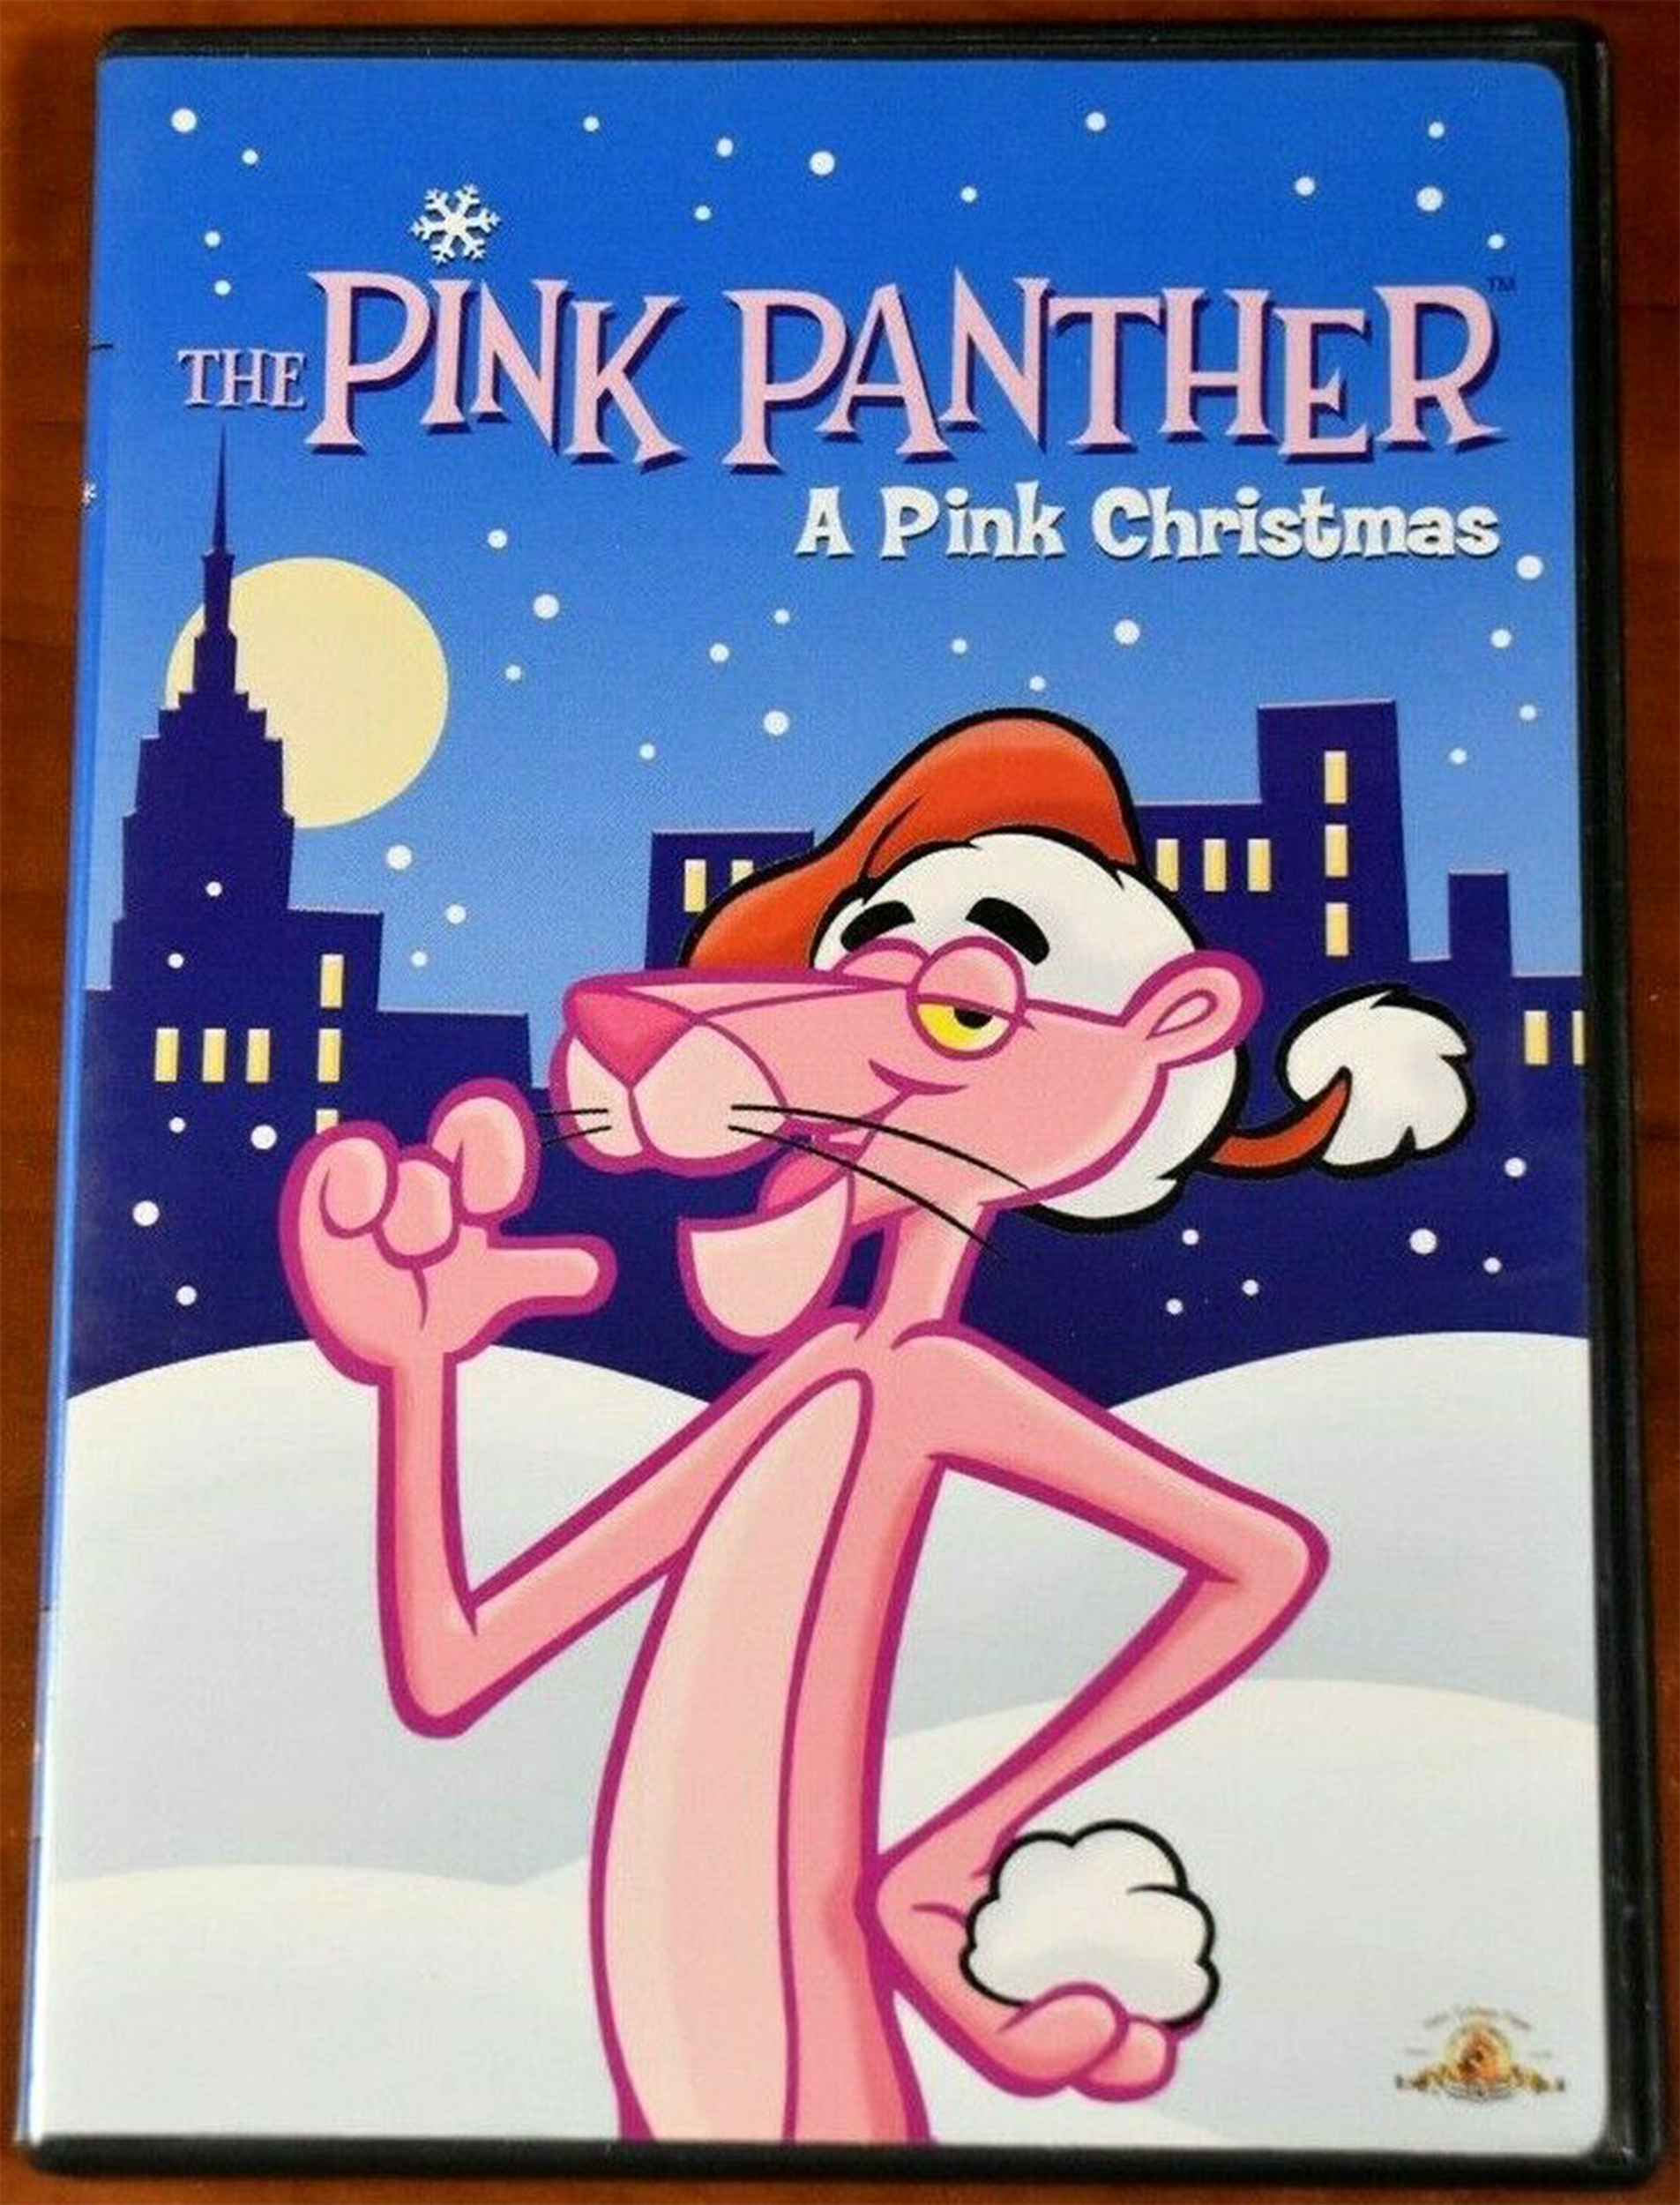 DVD - The Pink Panther - Fan Favorites Cartoon Collection, The Pink Panther  Wiki